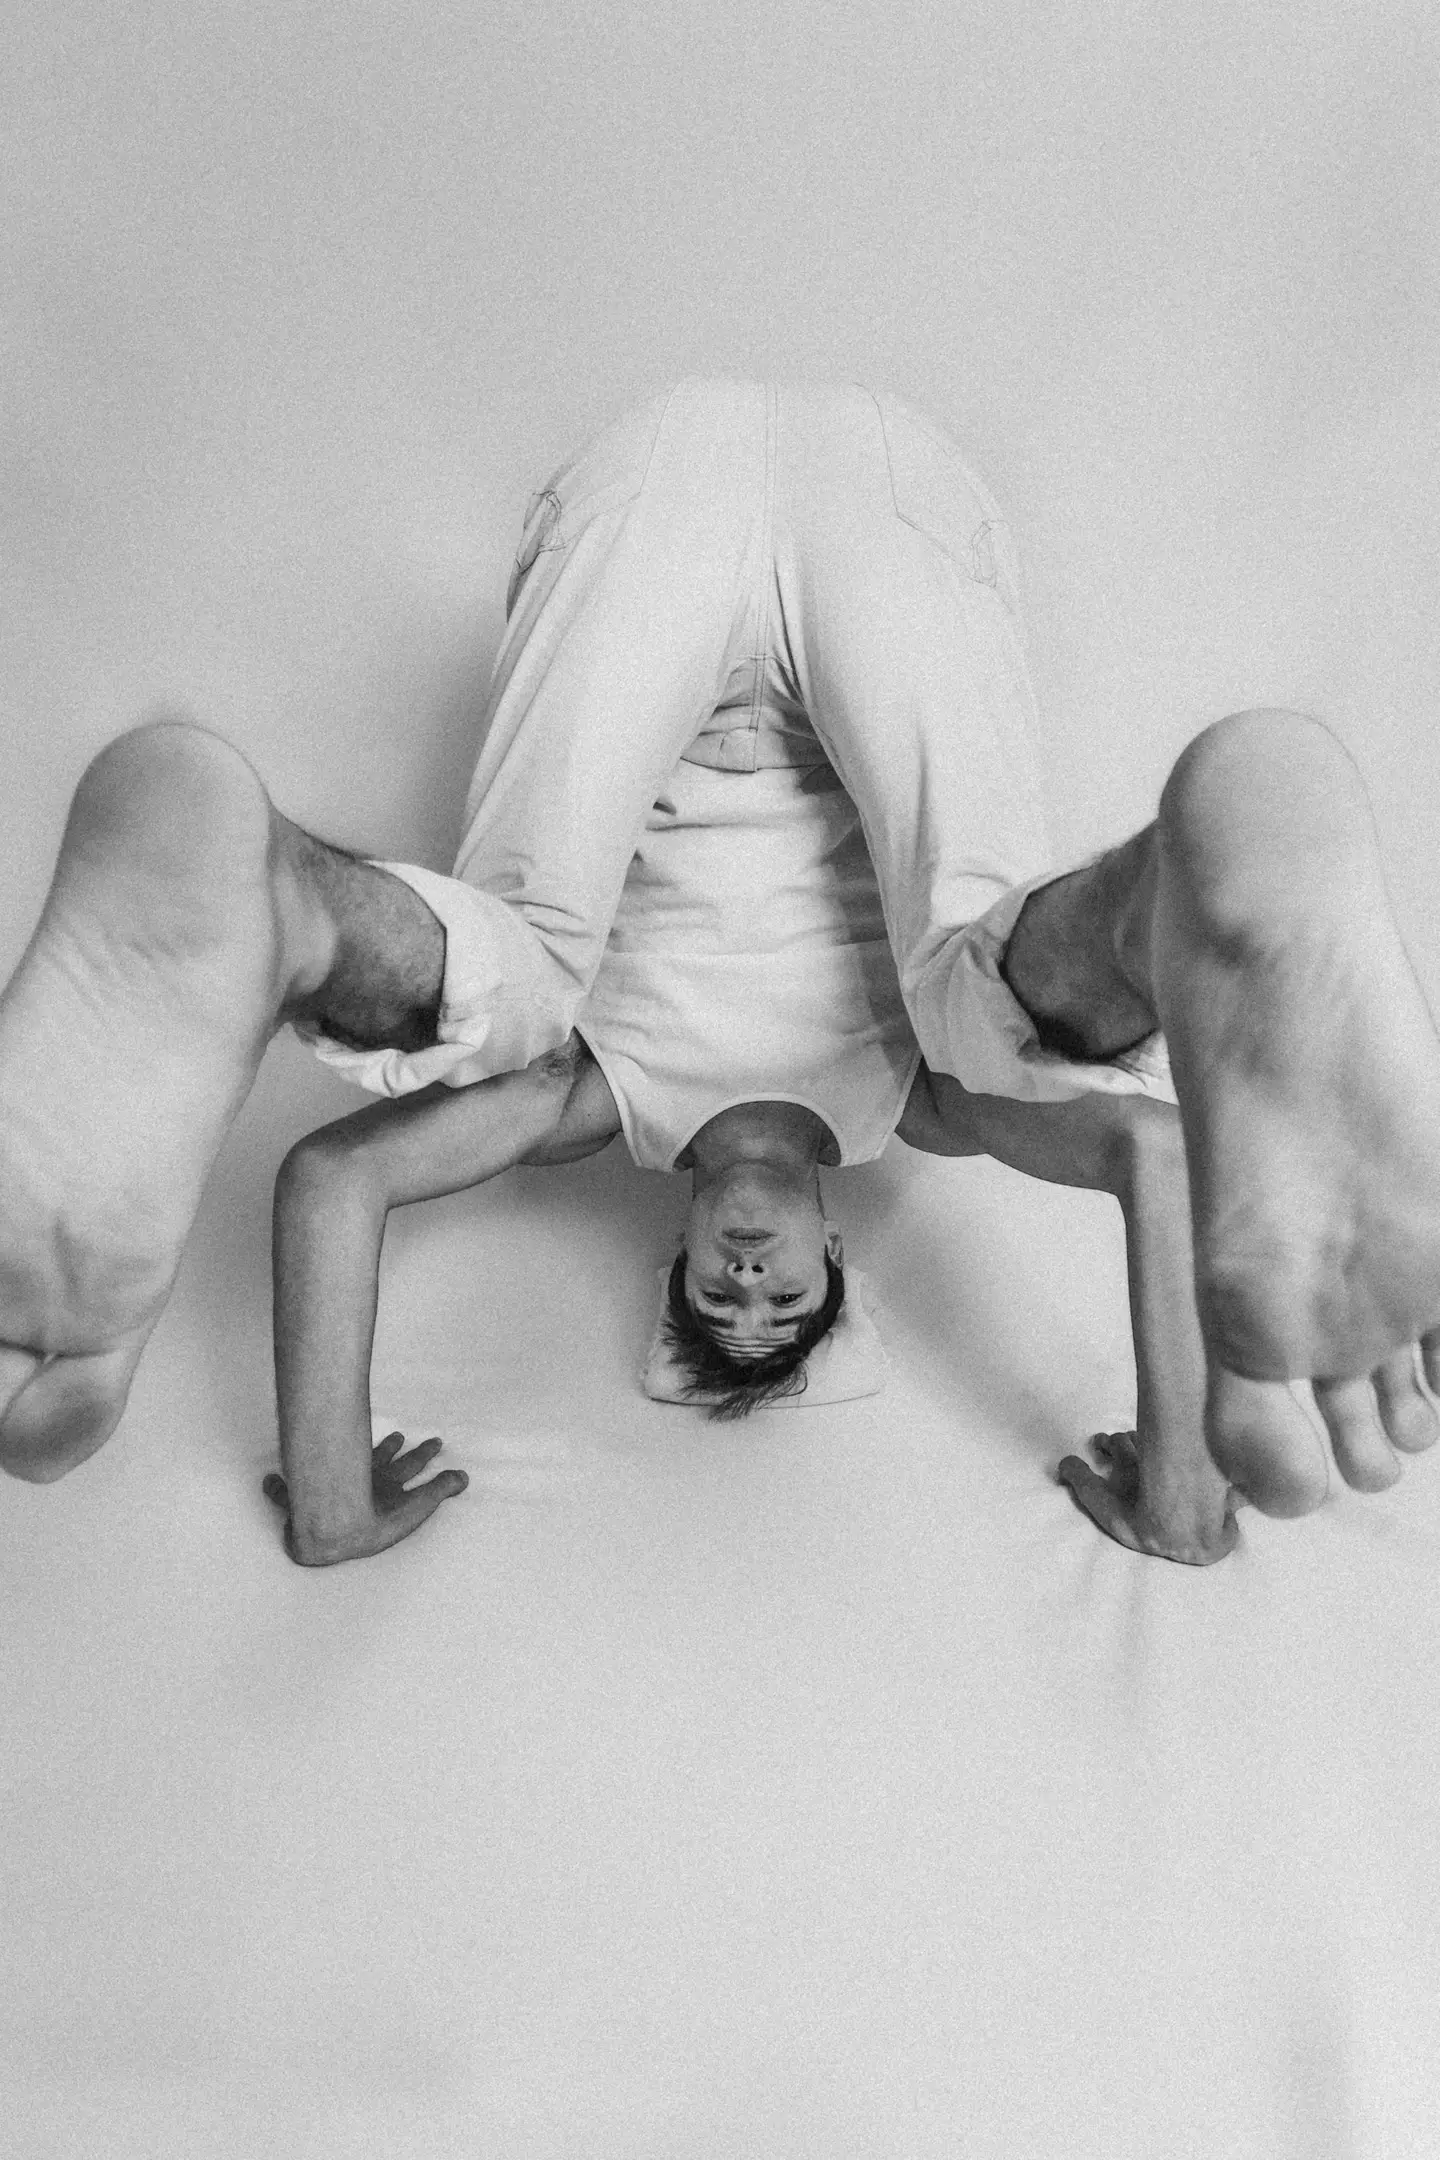 Can you see yourself doing headstands at your bedside before bed?